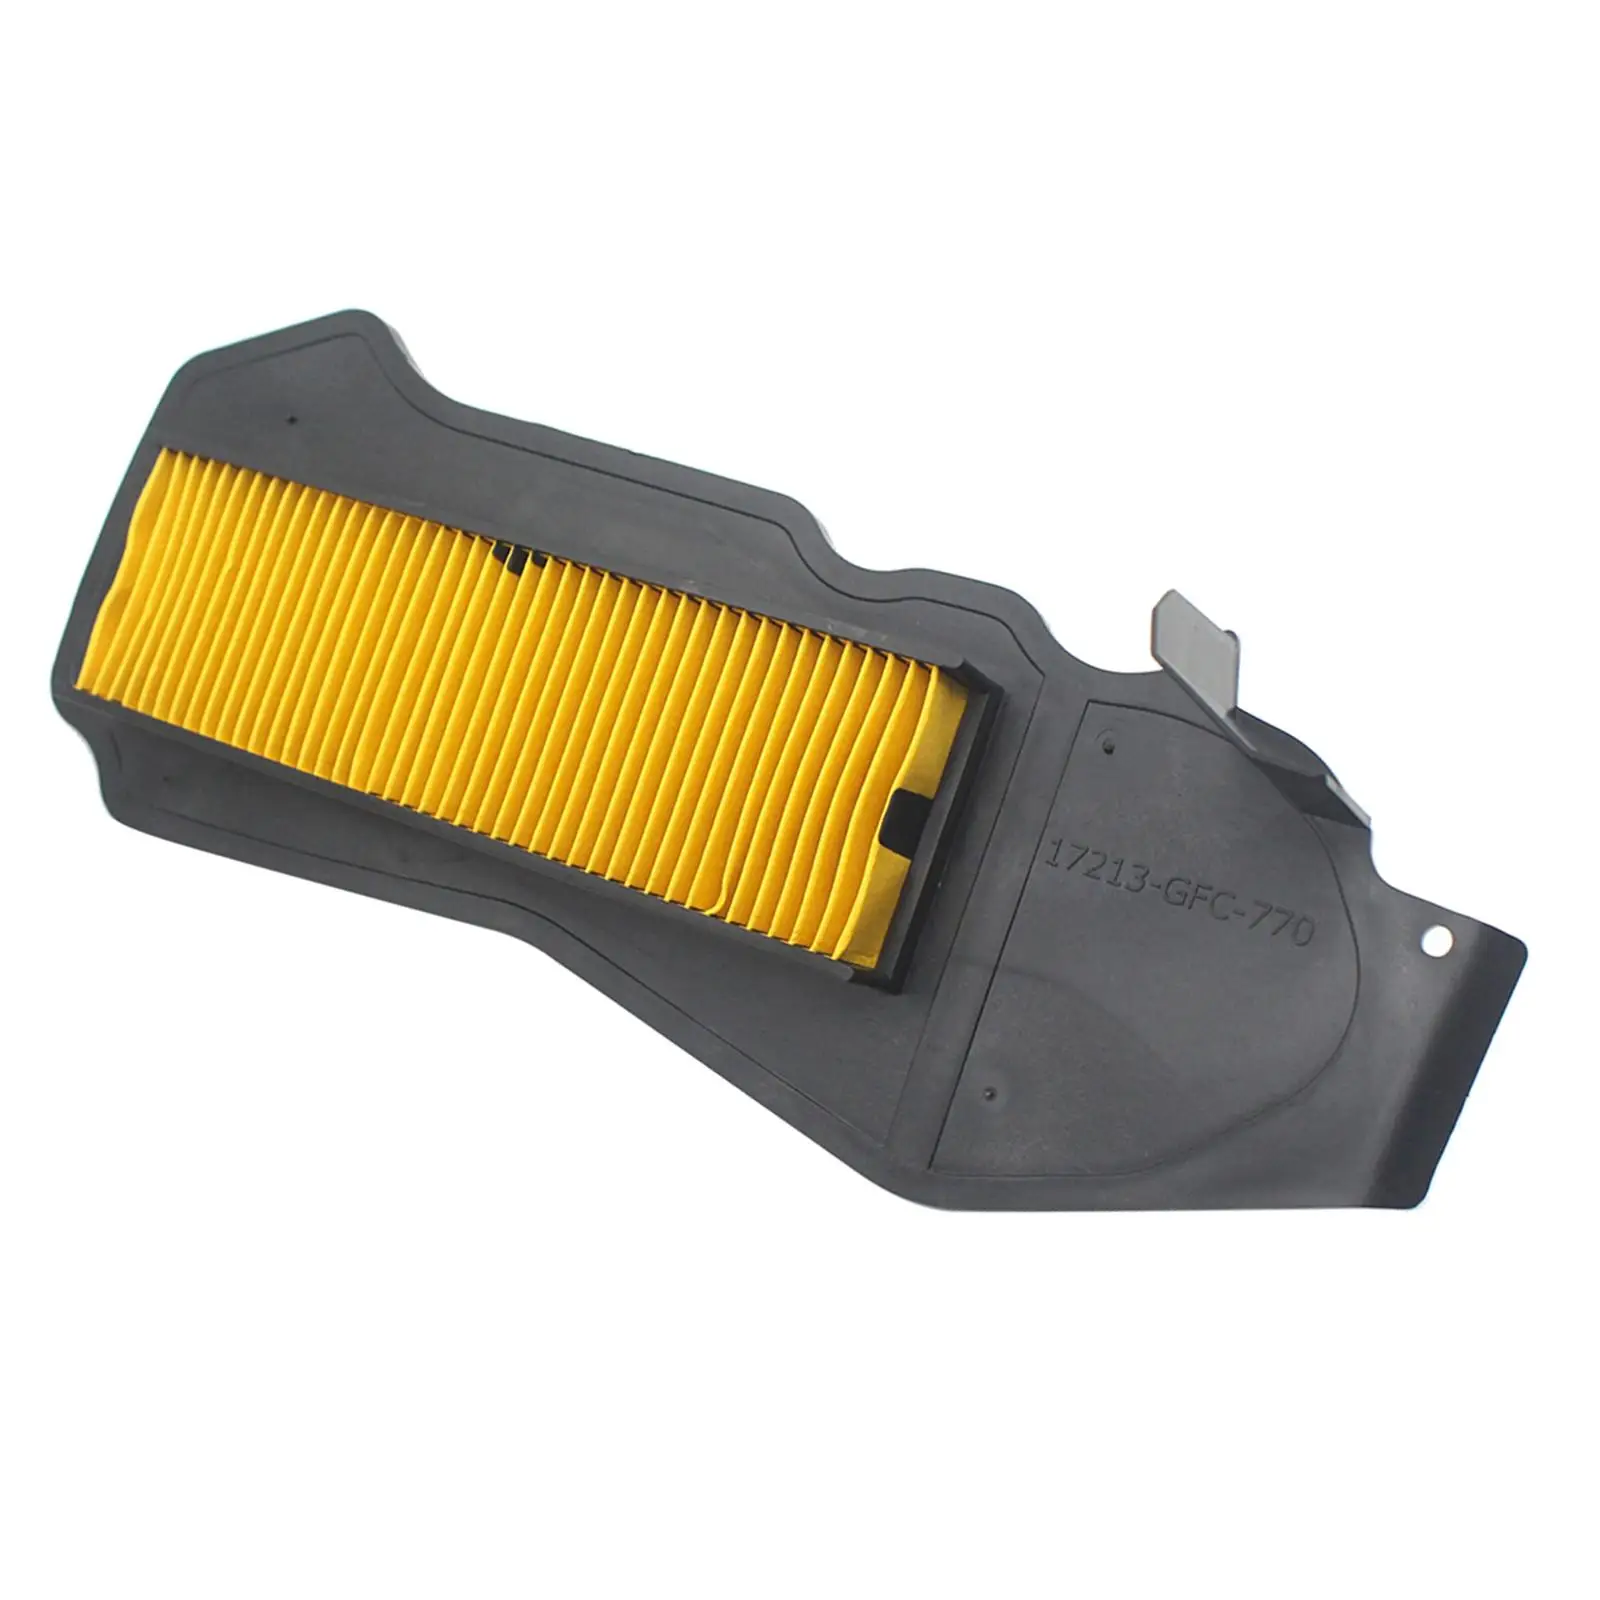 Flameer 1x Replacement Motorcycle Filter for AF68 Cleaner